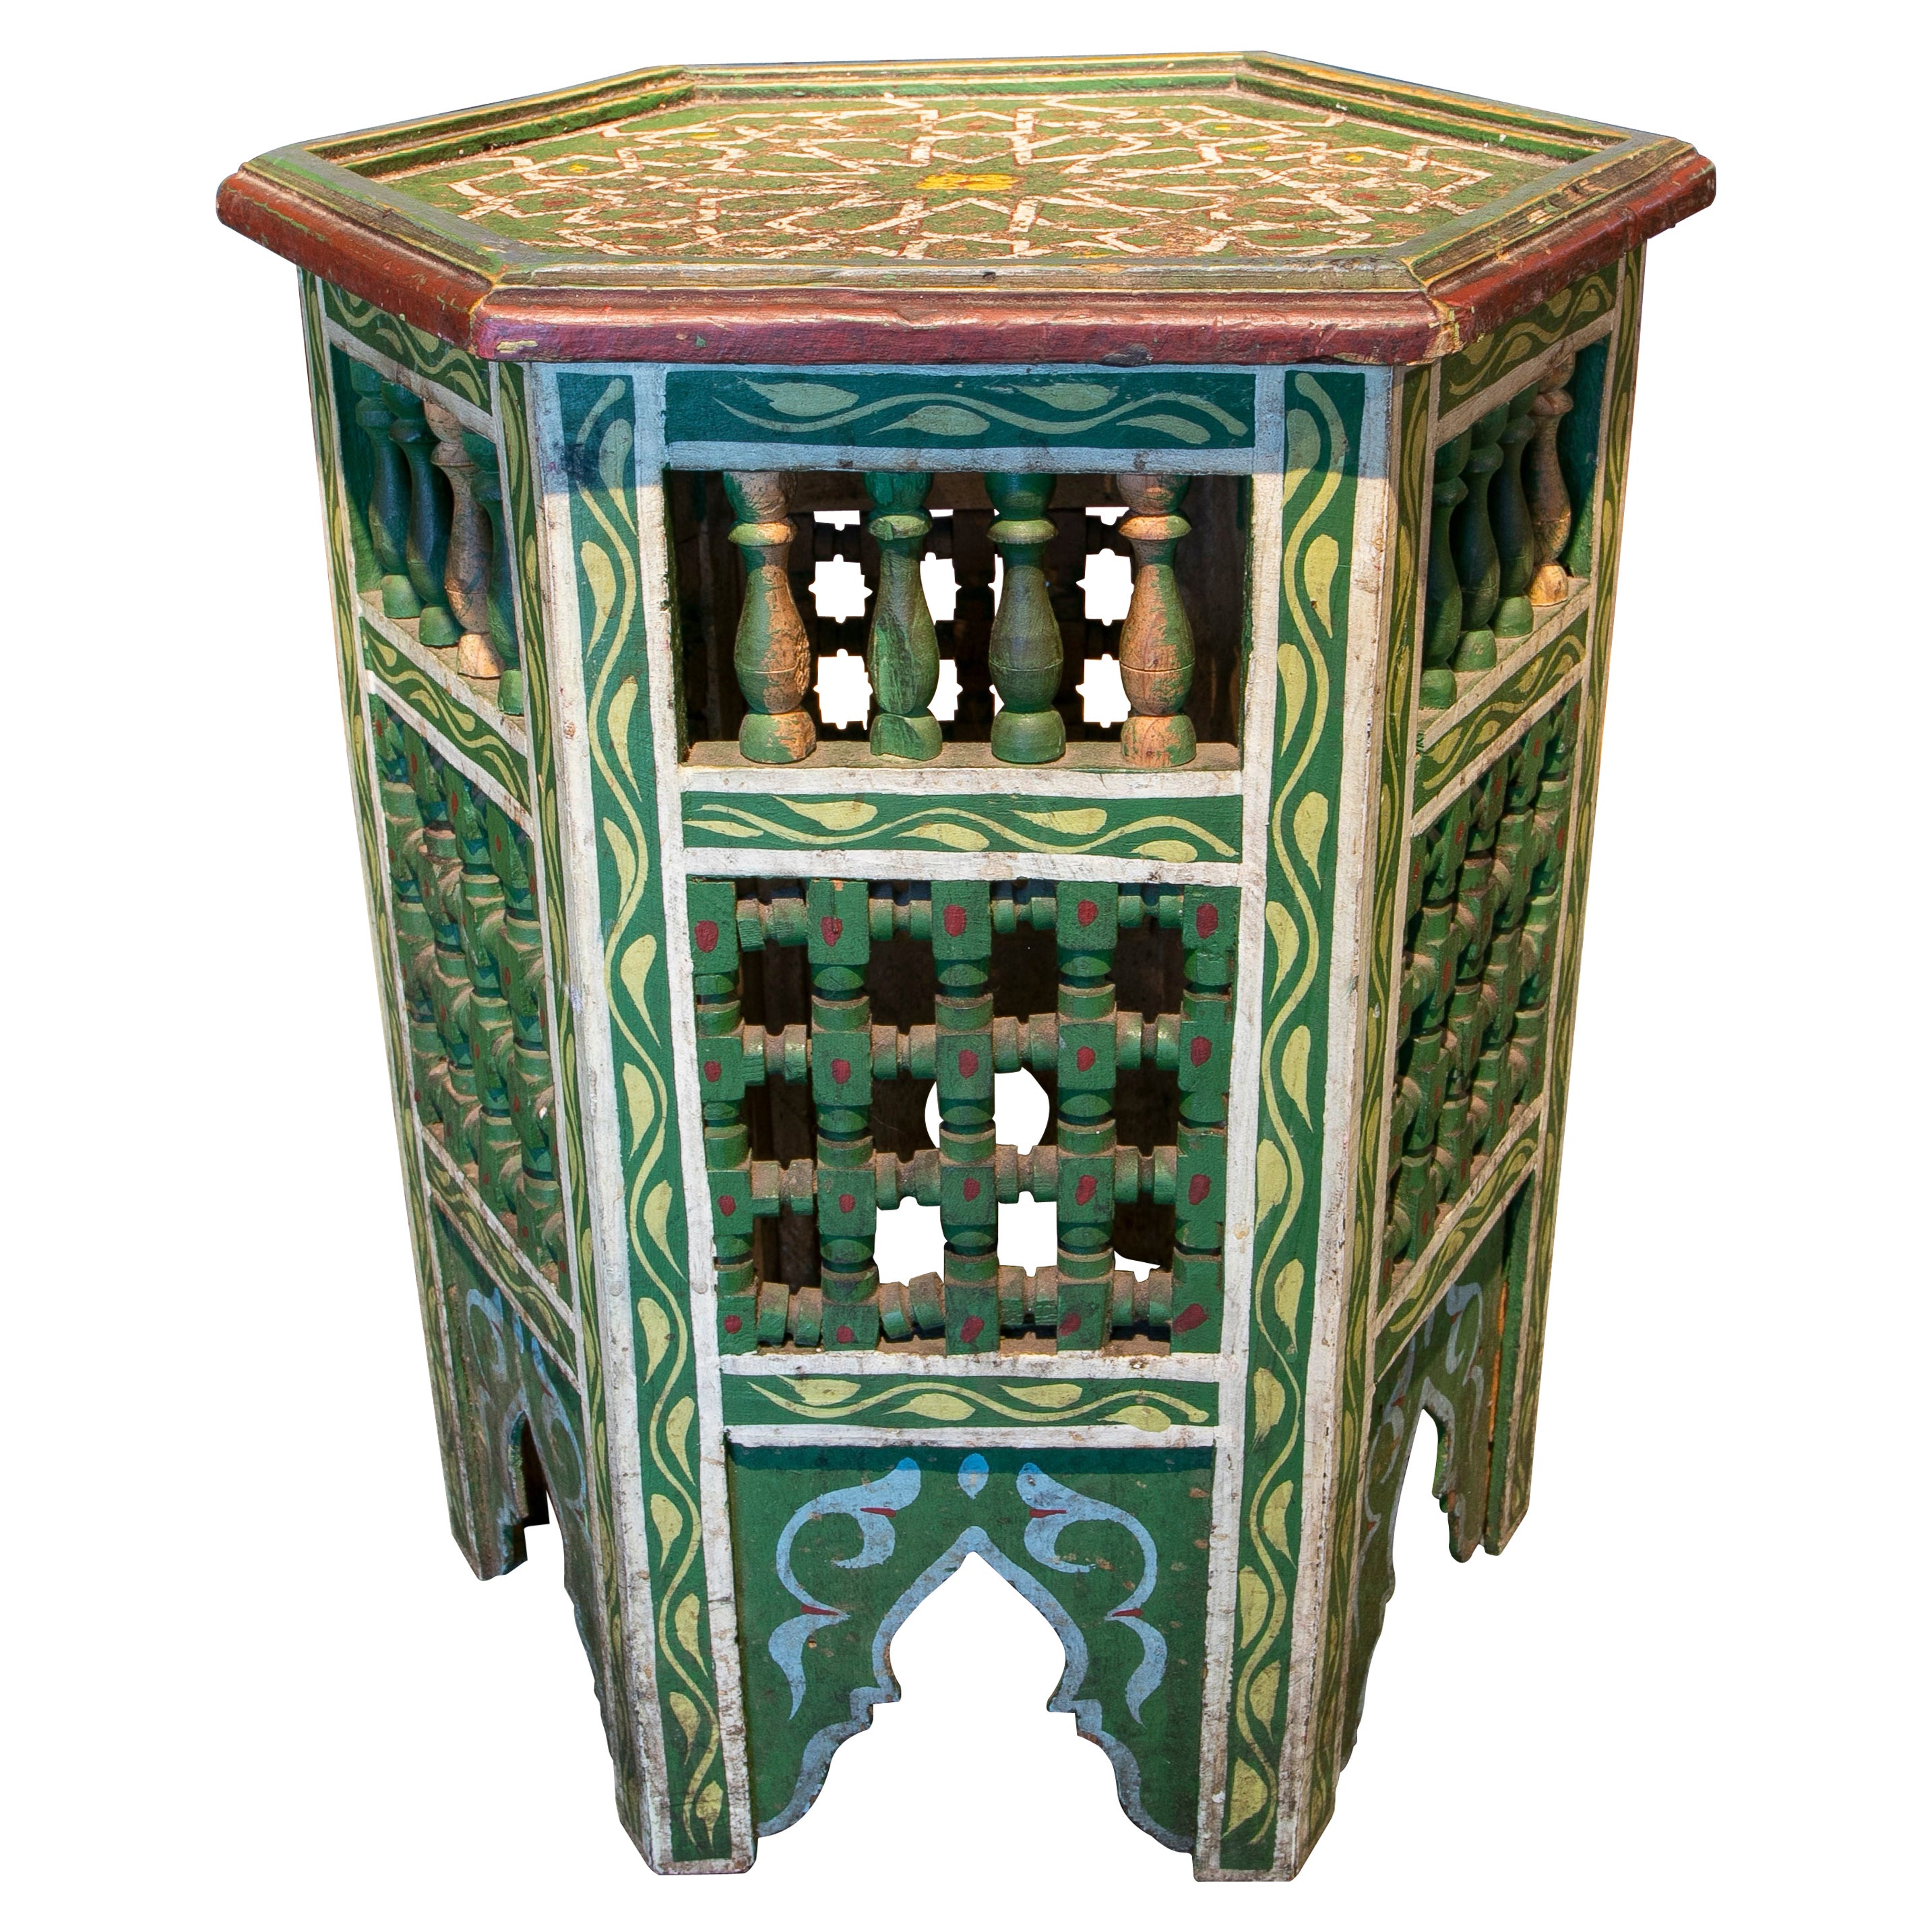 Mid-20th Century Moroccan Hand Painted Hexagonal Wooden Pedestal Table